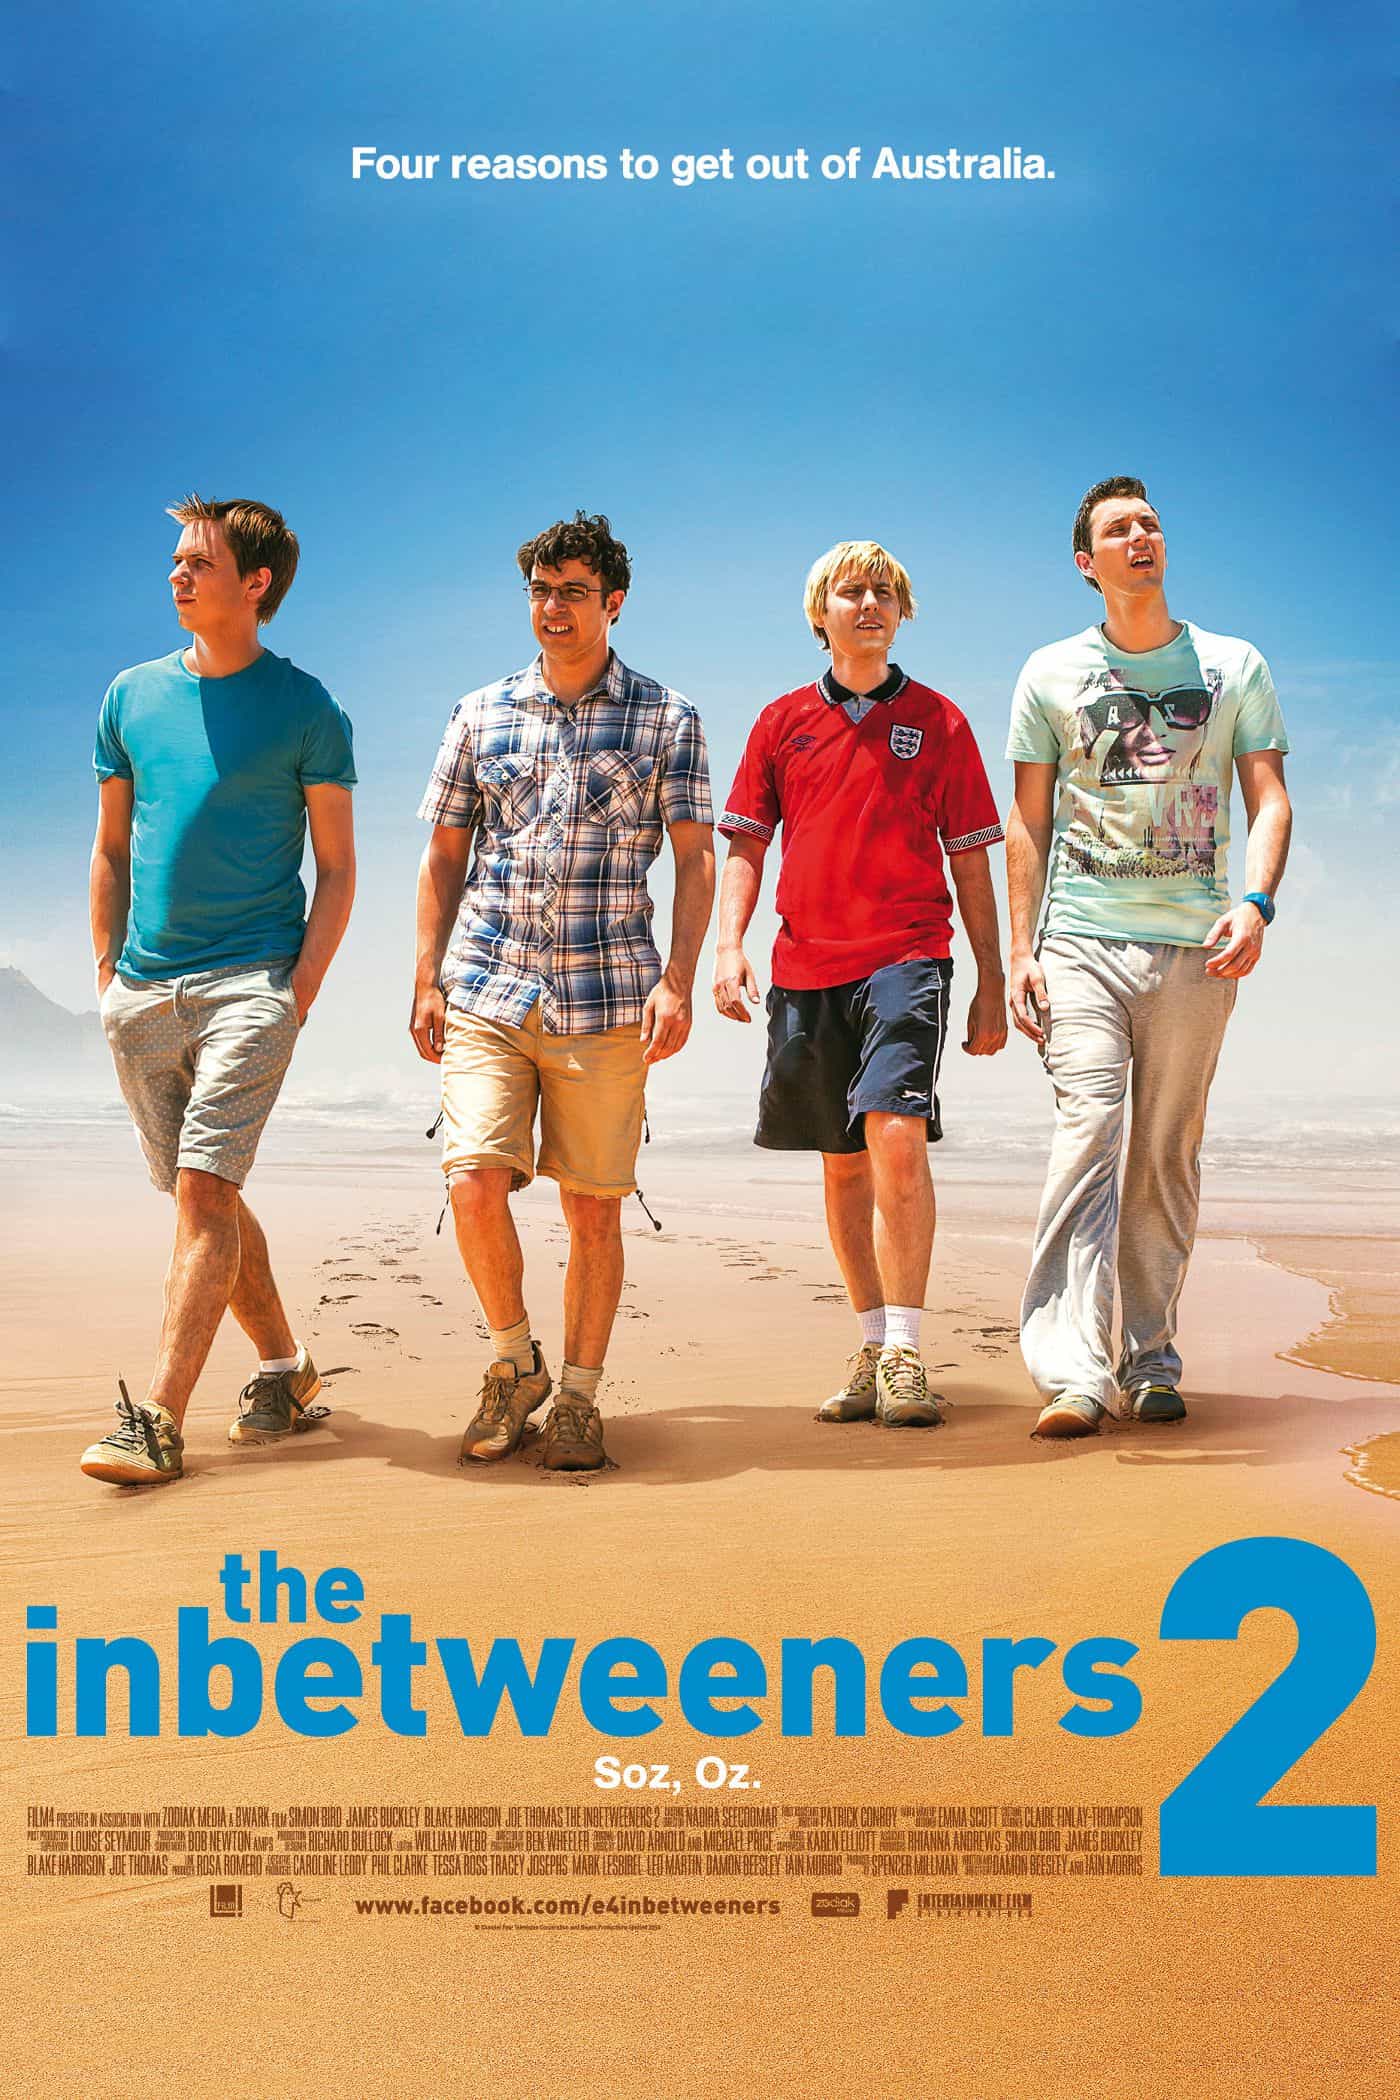 New film analysis 8th August: The Inbetweeners return for another go at the box office